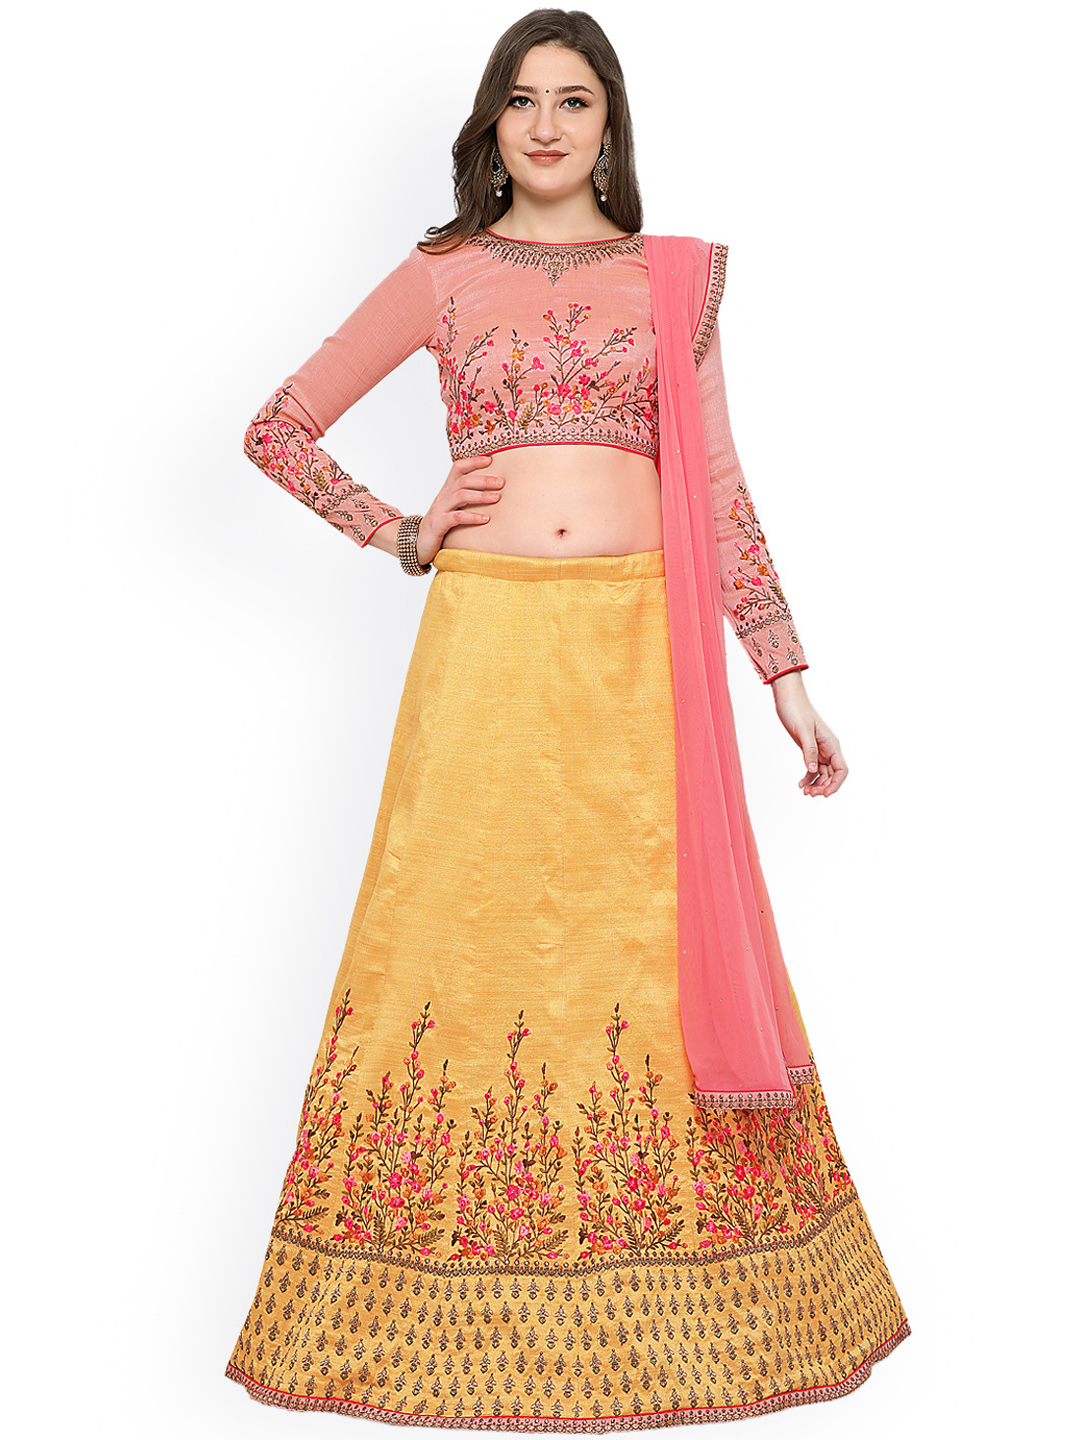 RIYA Gold-Toned & Pink Embroidered Semi-Stitched Lehenga & Unstitched Blouse with Dupatta Price in India